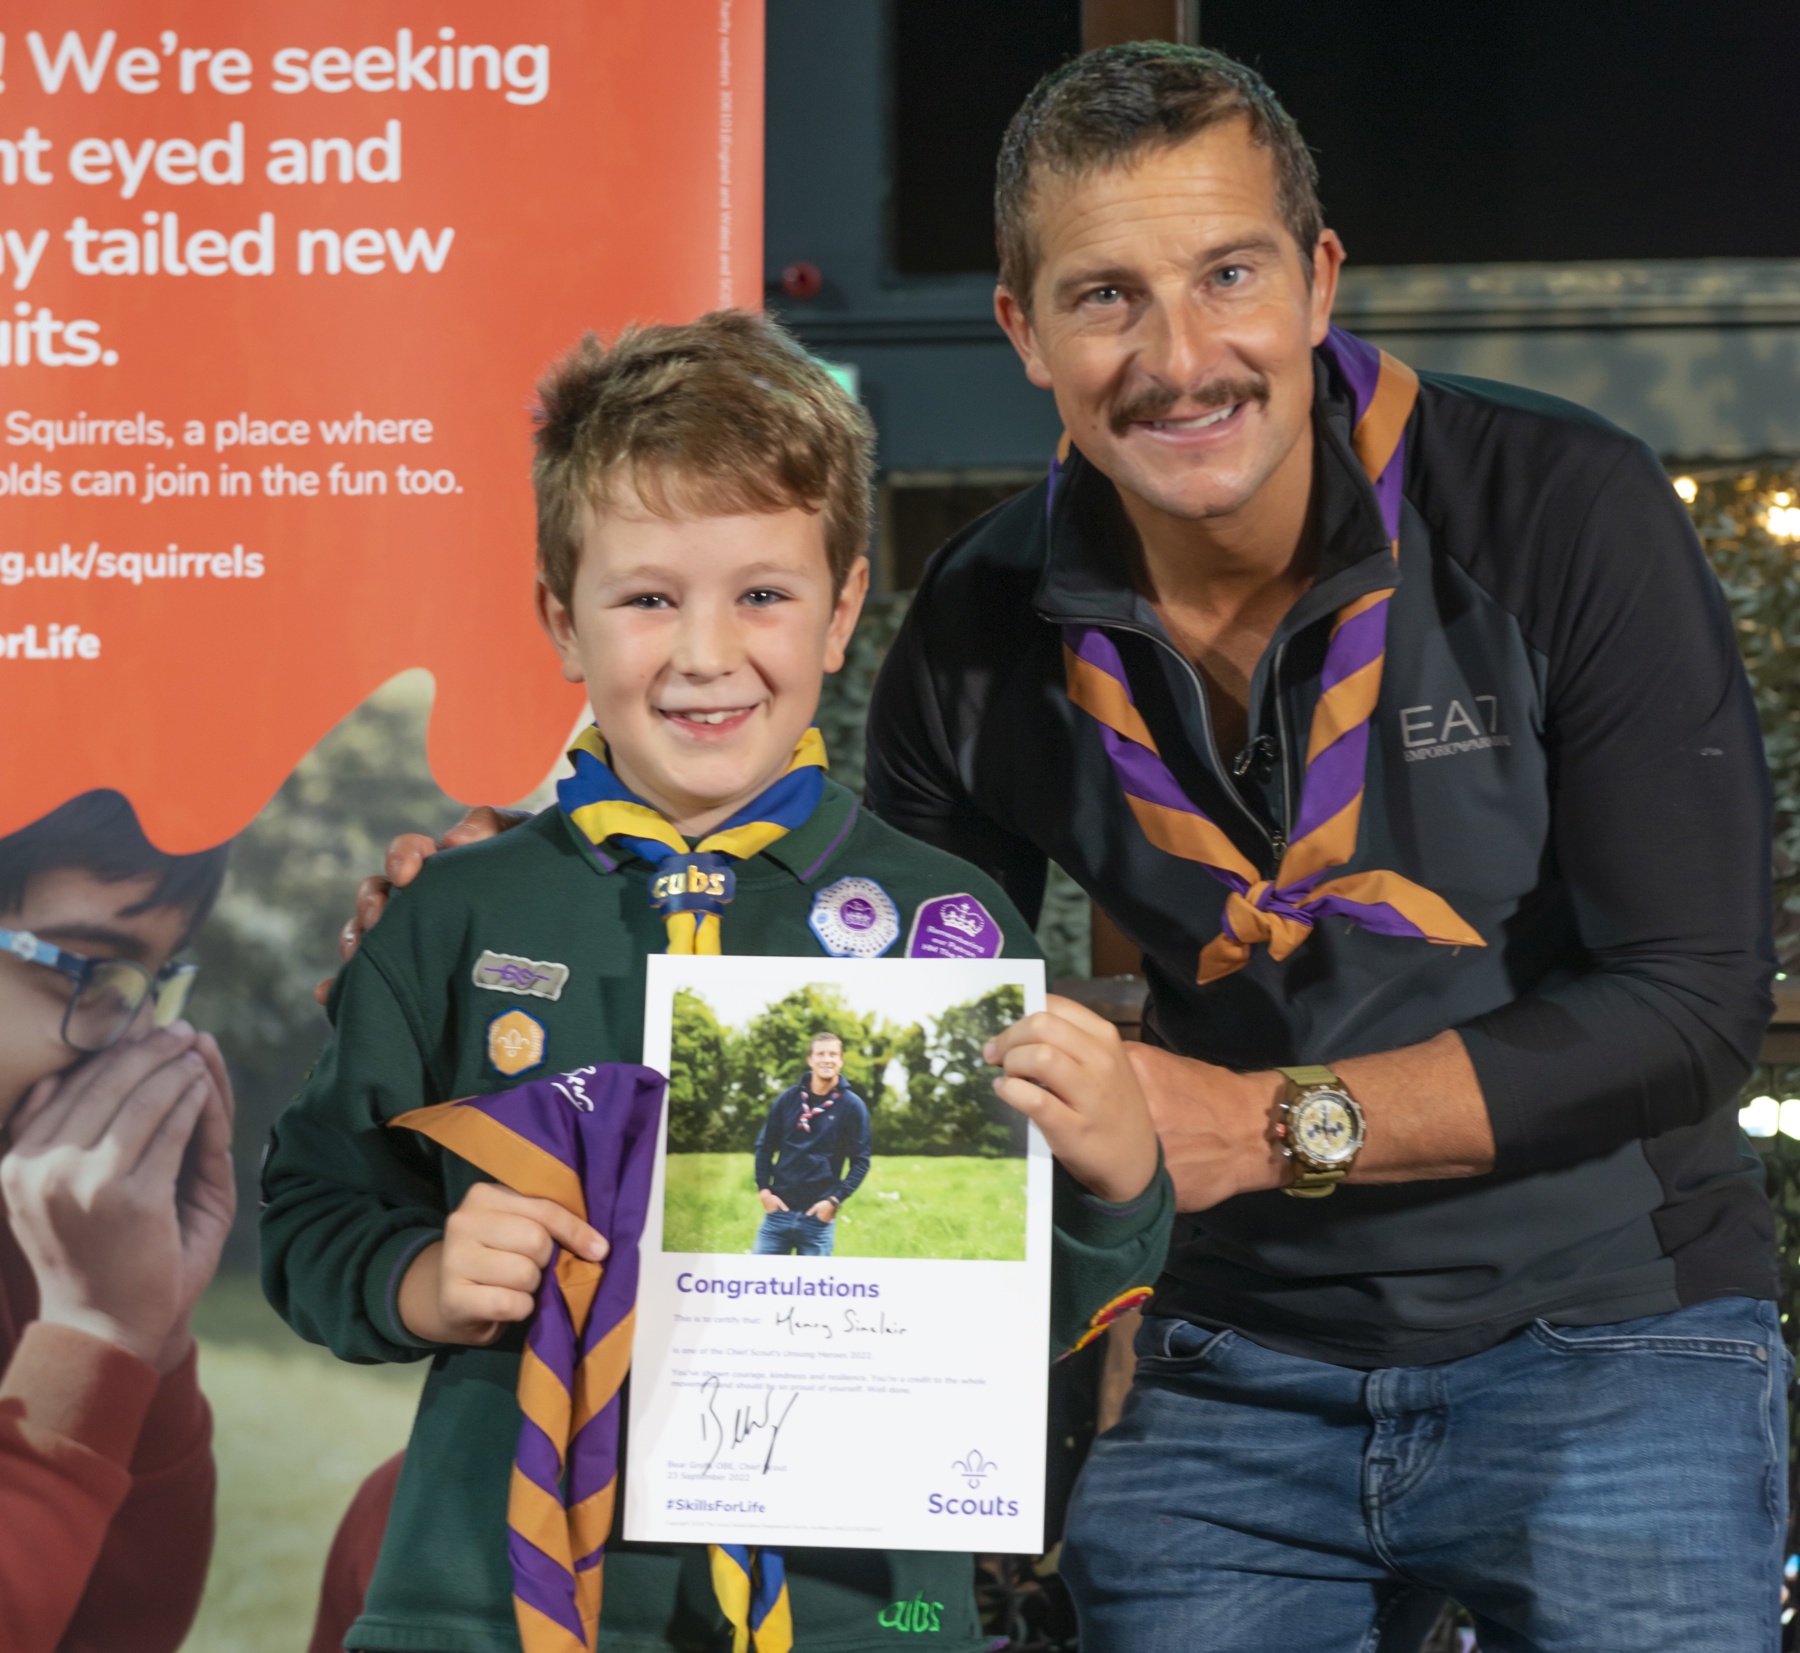 Henry's wearing his Cub uniform and a necker, and is holding a 'Congratulations' certificate. He stands next to Chief Scout Bear Grylls, with both of them smiling at the camera.